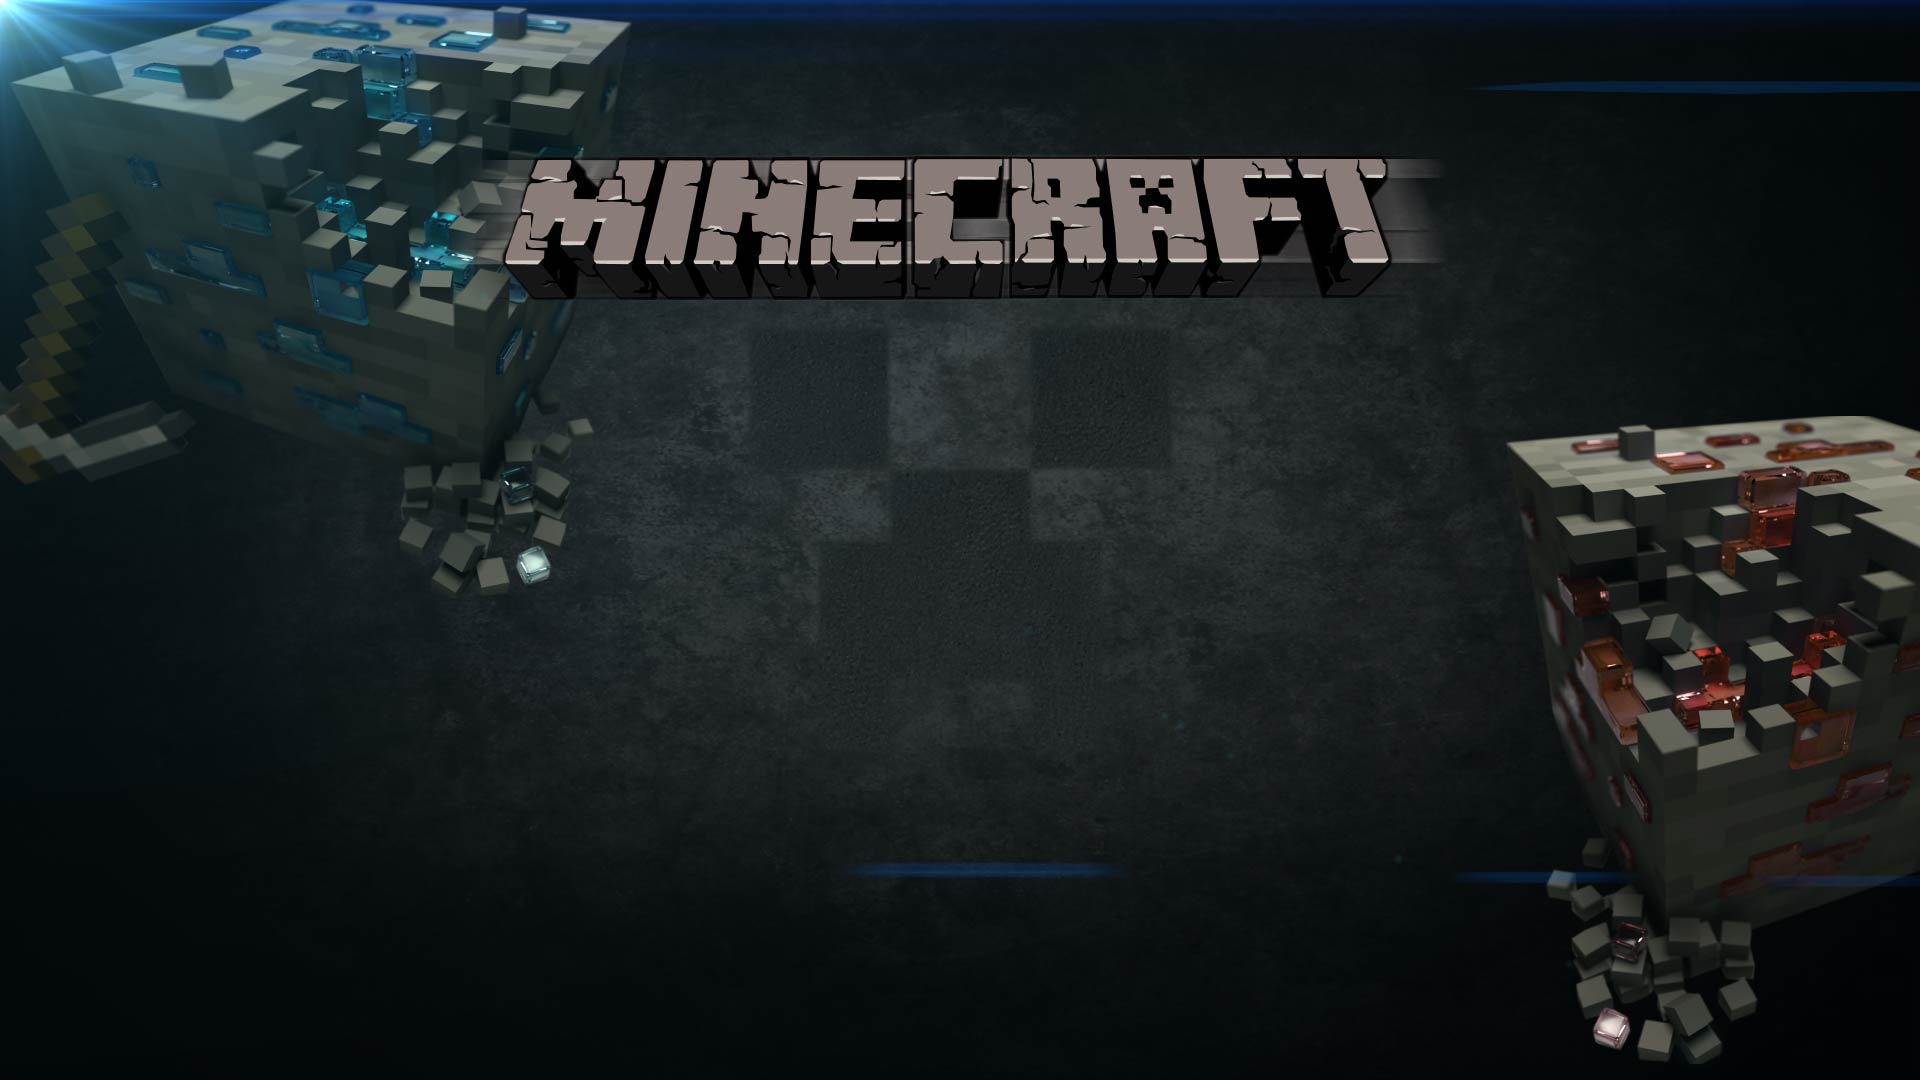 Wallpapers For > Hd Minecraft Wallpapers 1080p